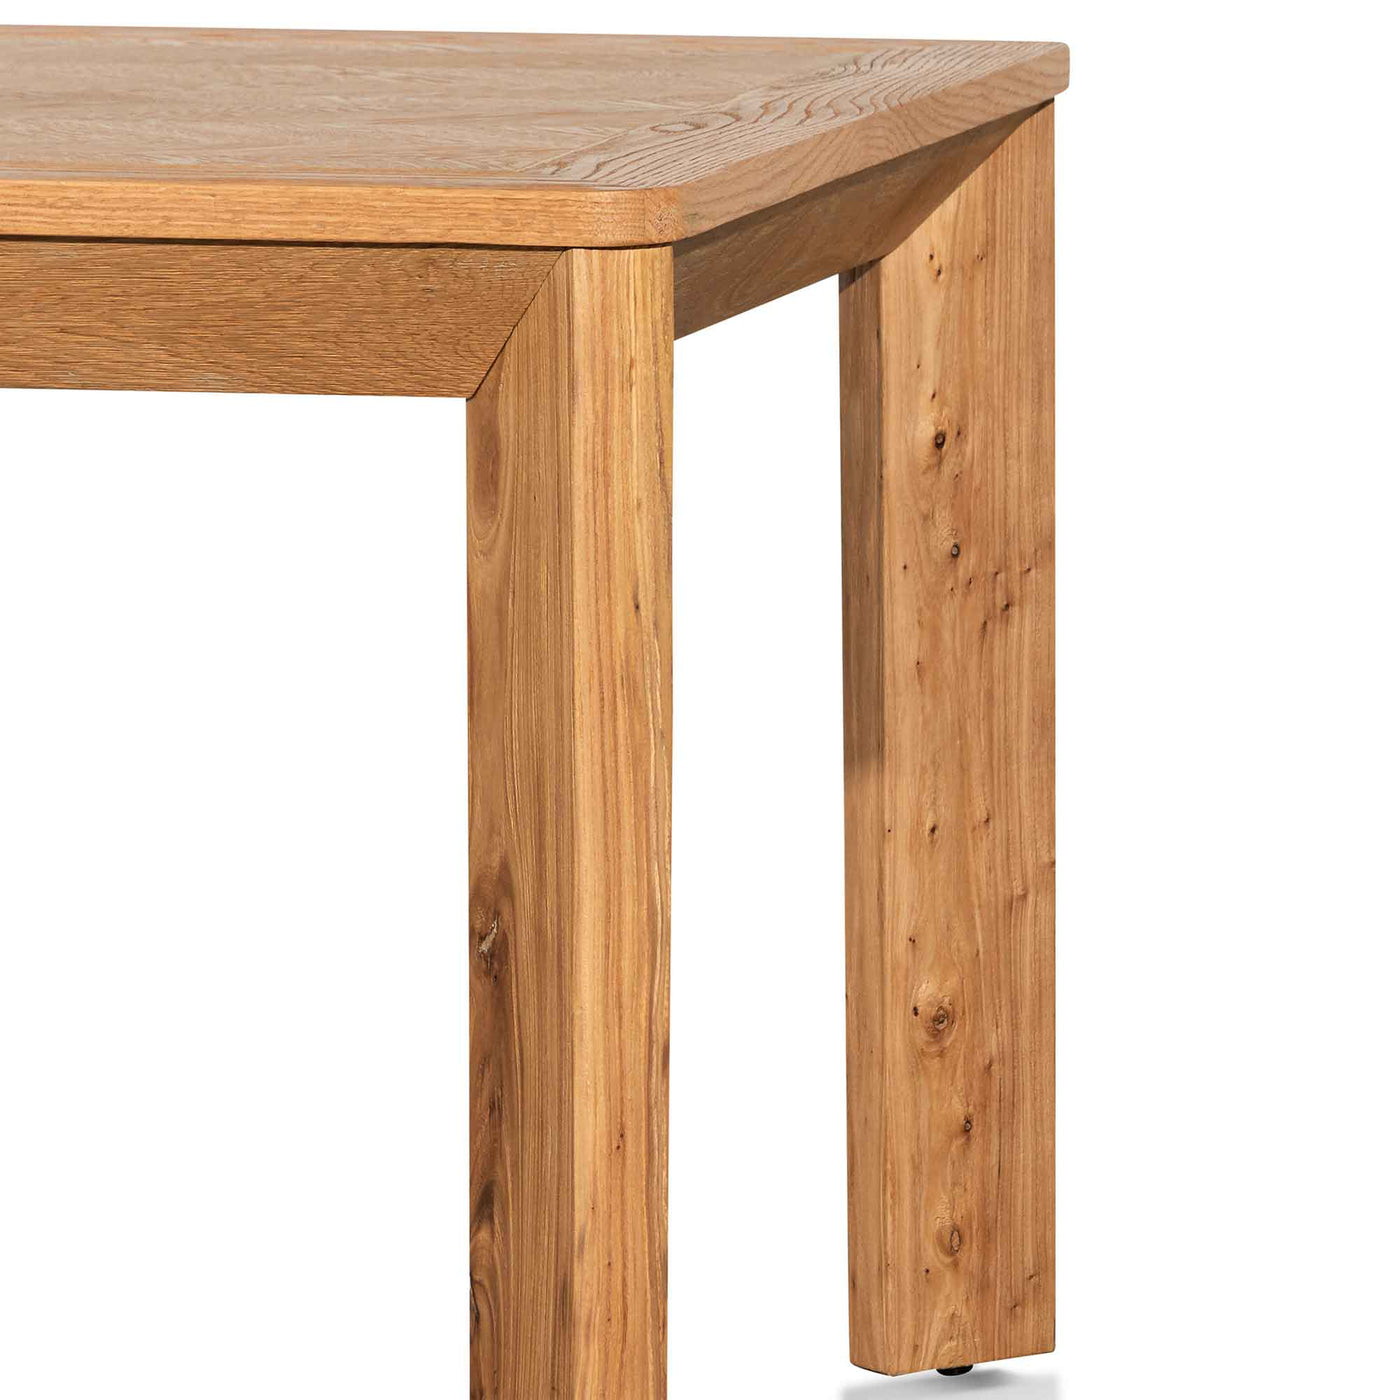 3m Wooden Dining Table - Distress Natural